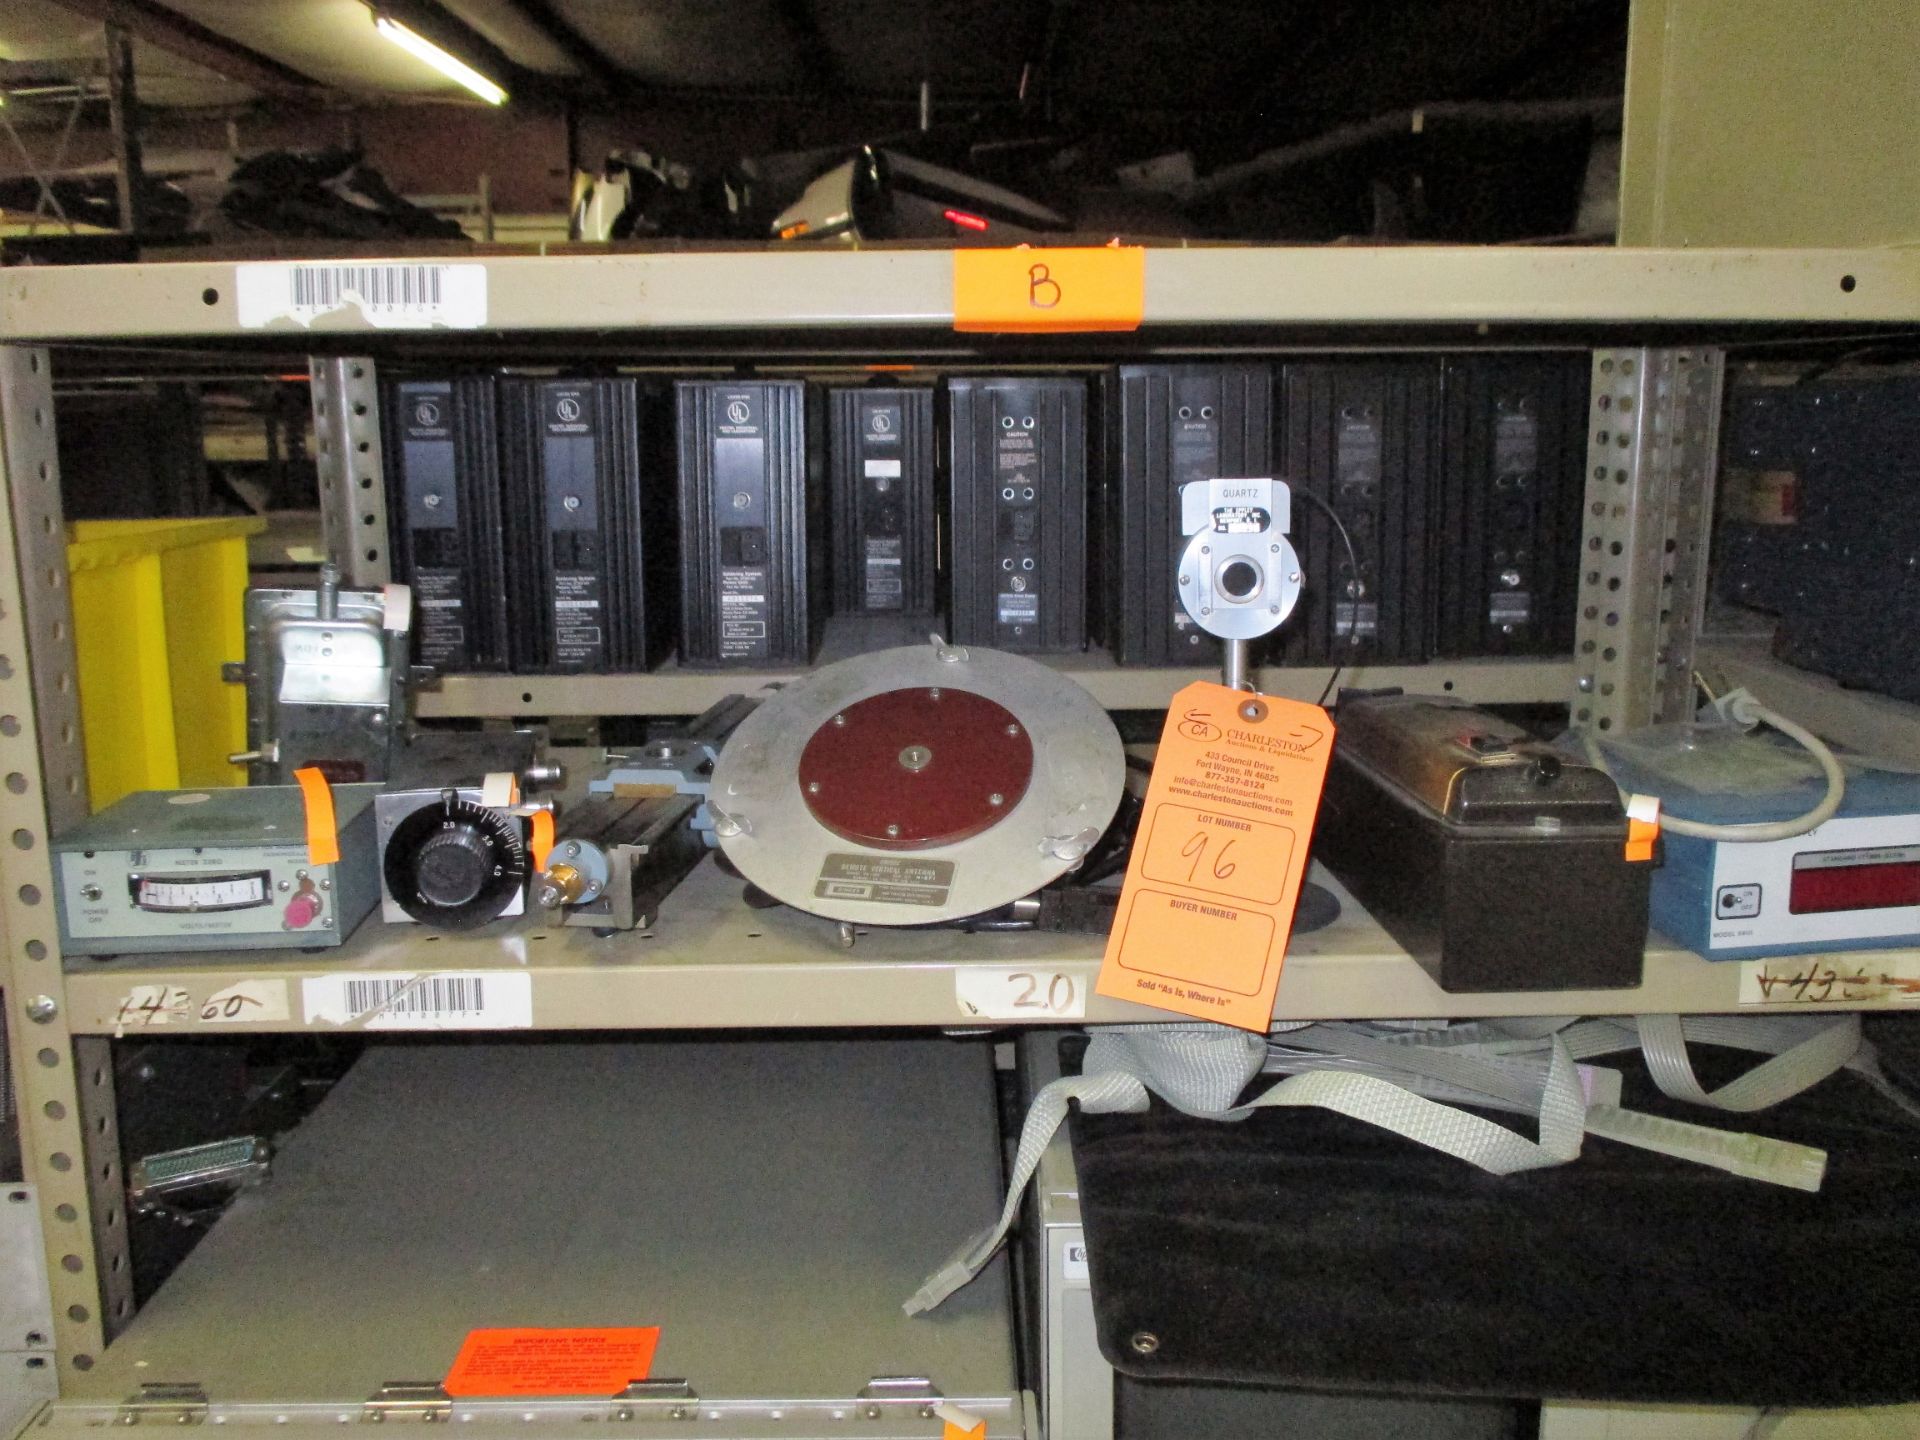 CONTENTS OF TOP SHELF INCLUDING TSI DISPLAY/POWER SUPPLY M#8910; INSTRUMENTS FOR INDUSTRY VOLT METER